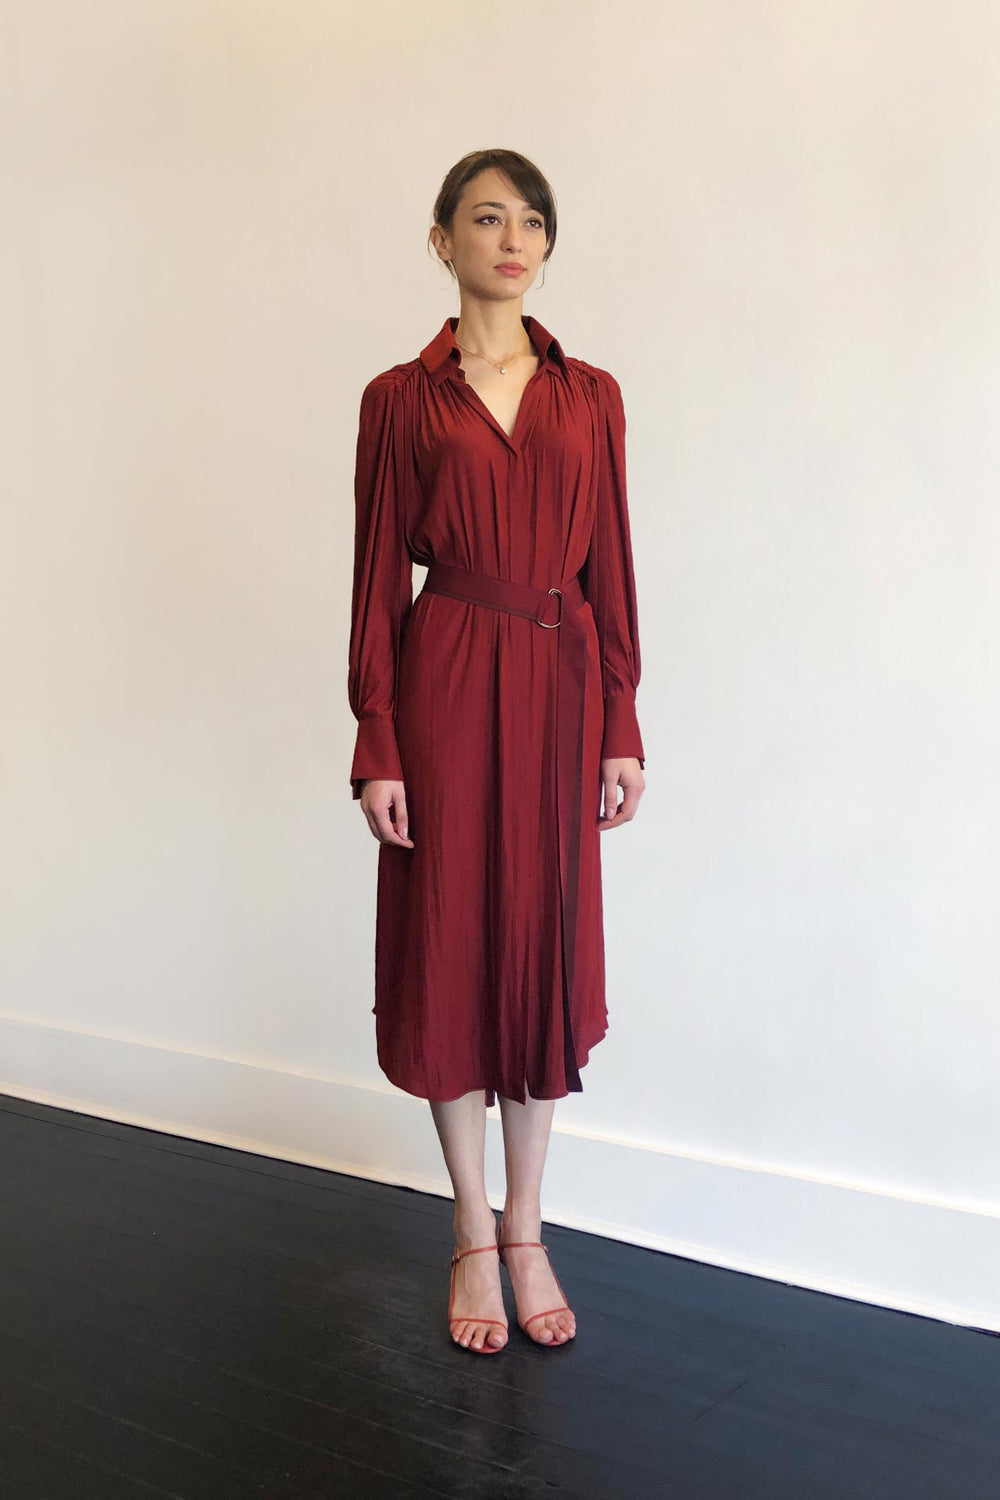 Fashion Designer CARL KAPP collection | Pheasant Onesize Fits All cocktail dress with sleeves Red | Sydney Australia